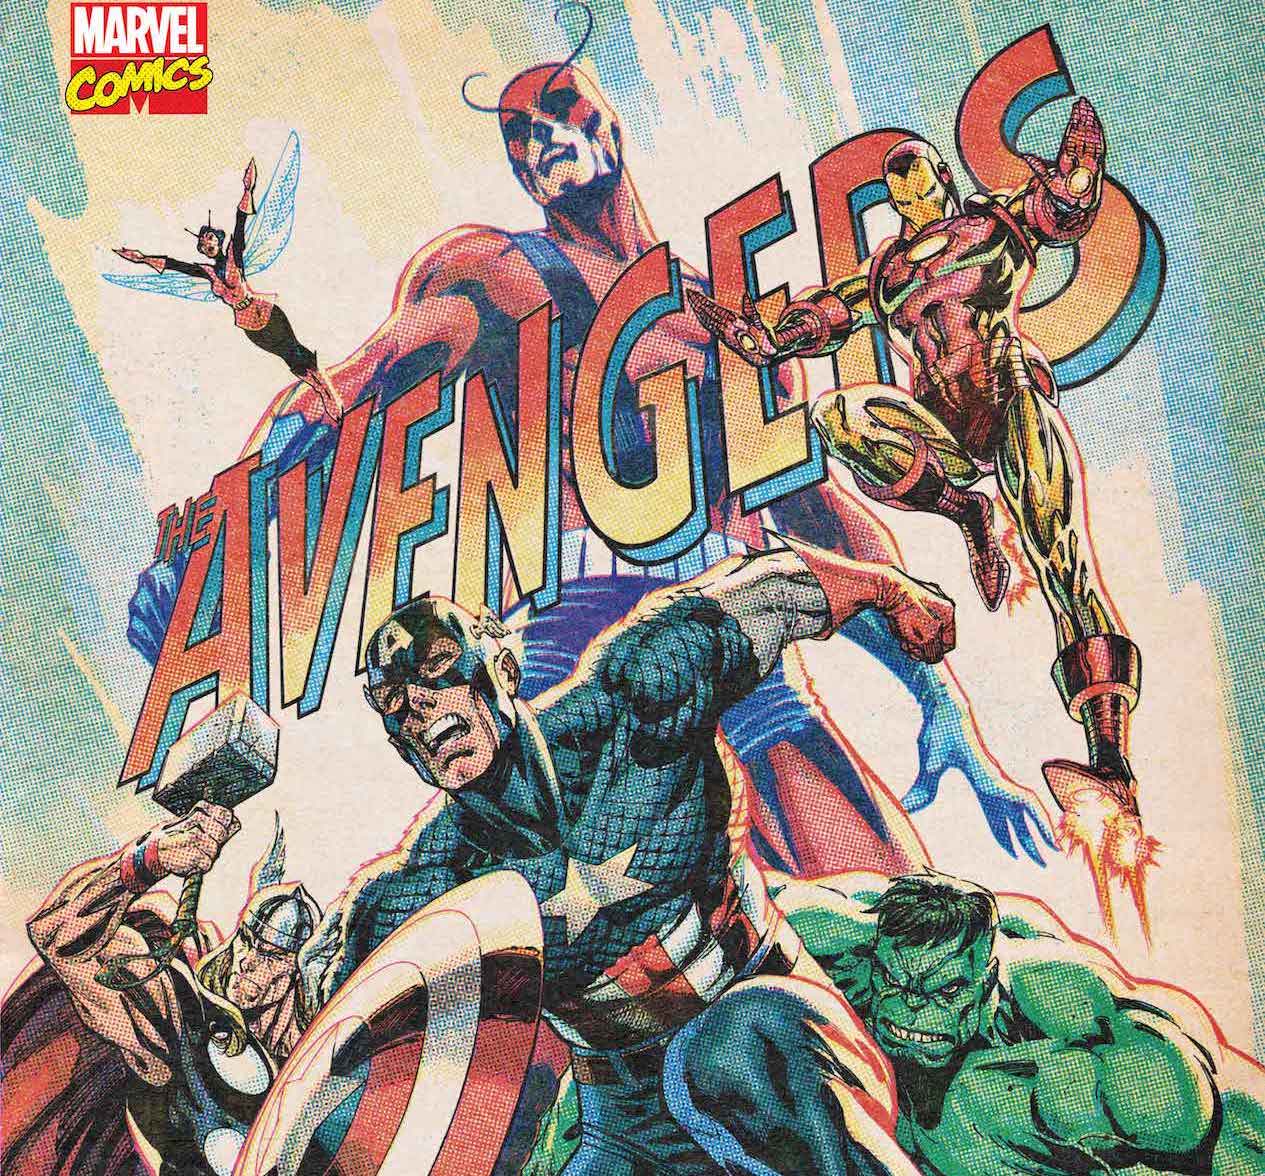 J. Scott Campbell adds the Avengers to retro variant cover series